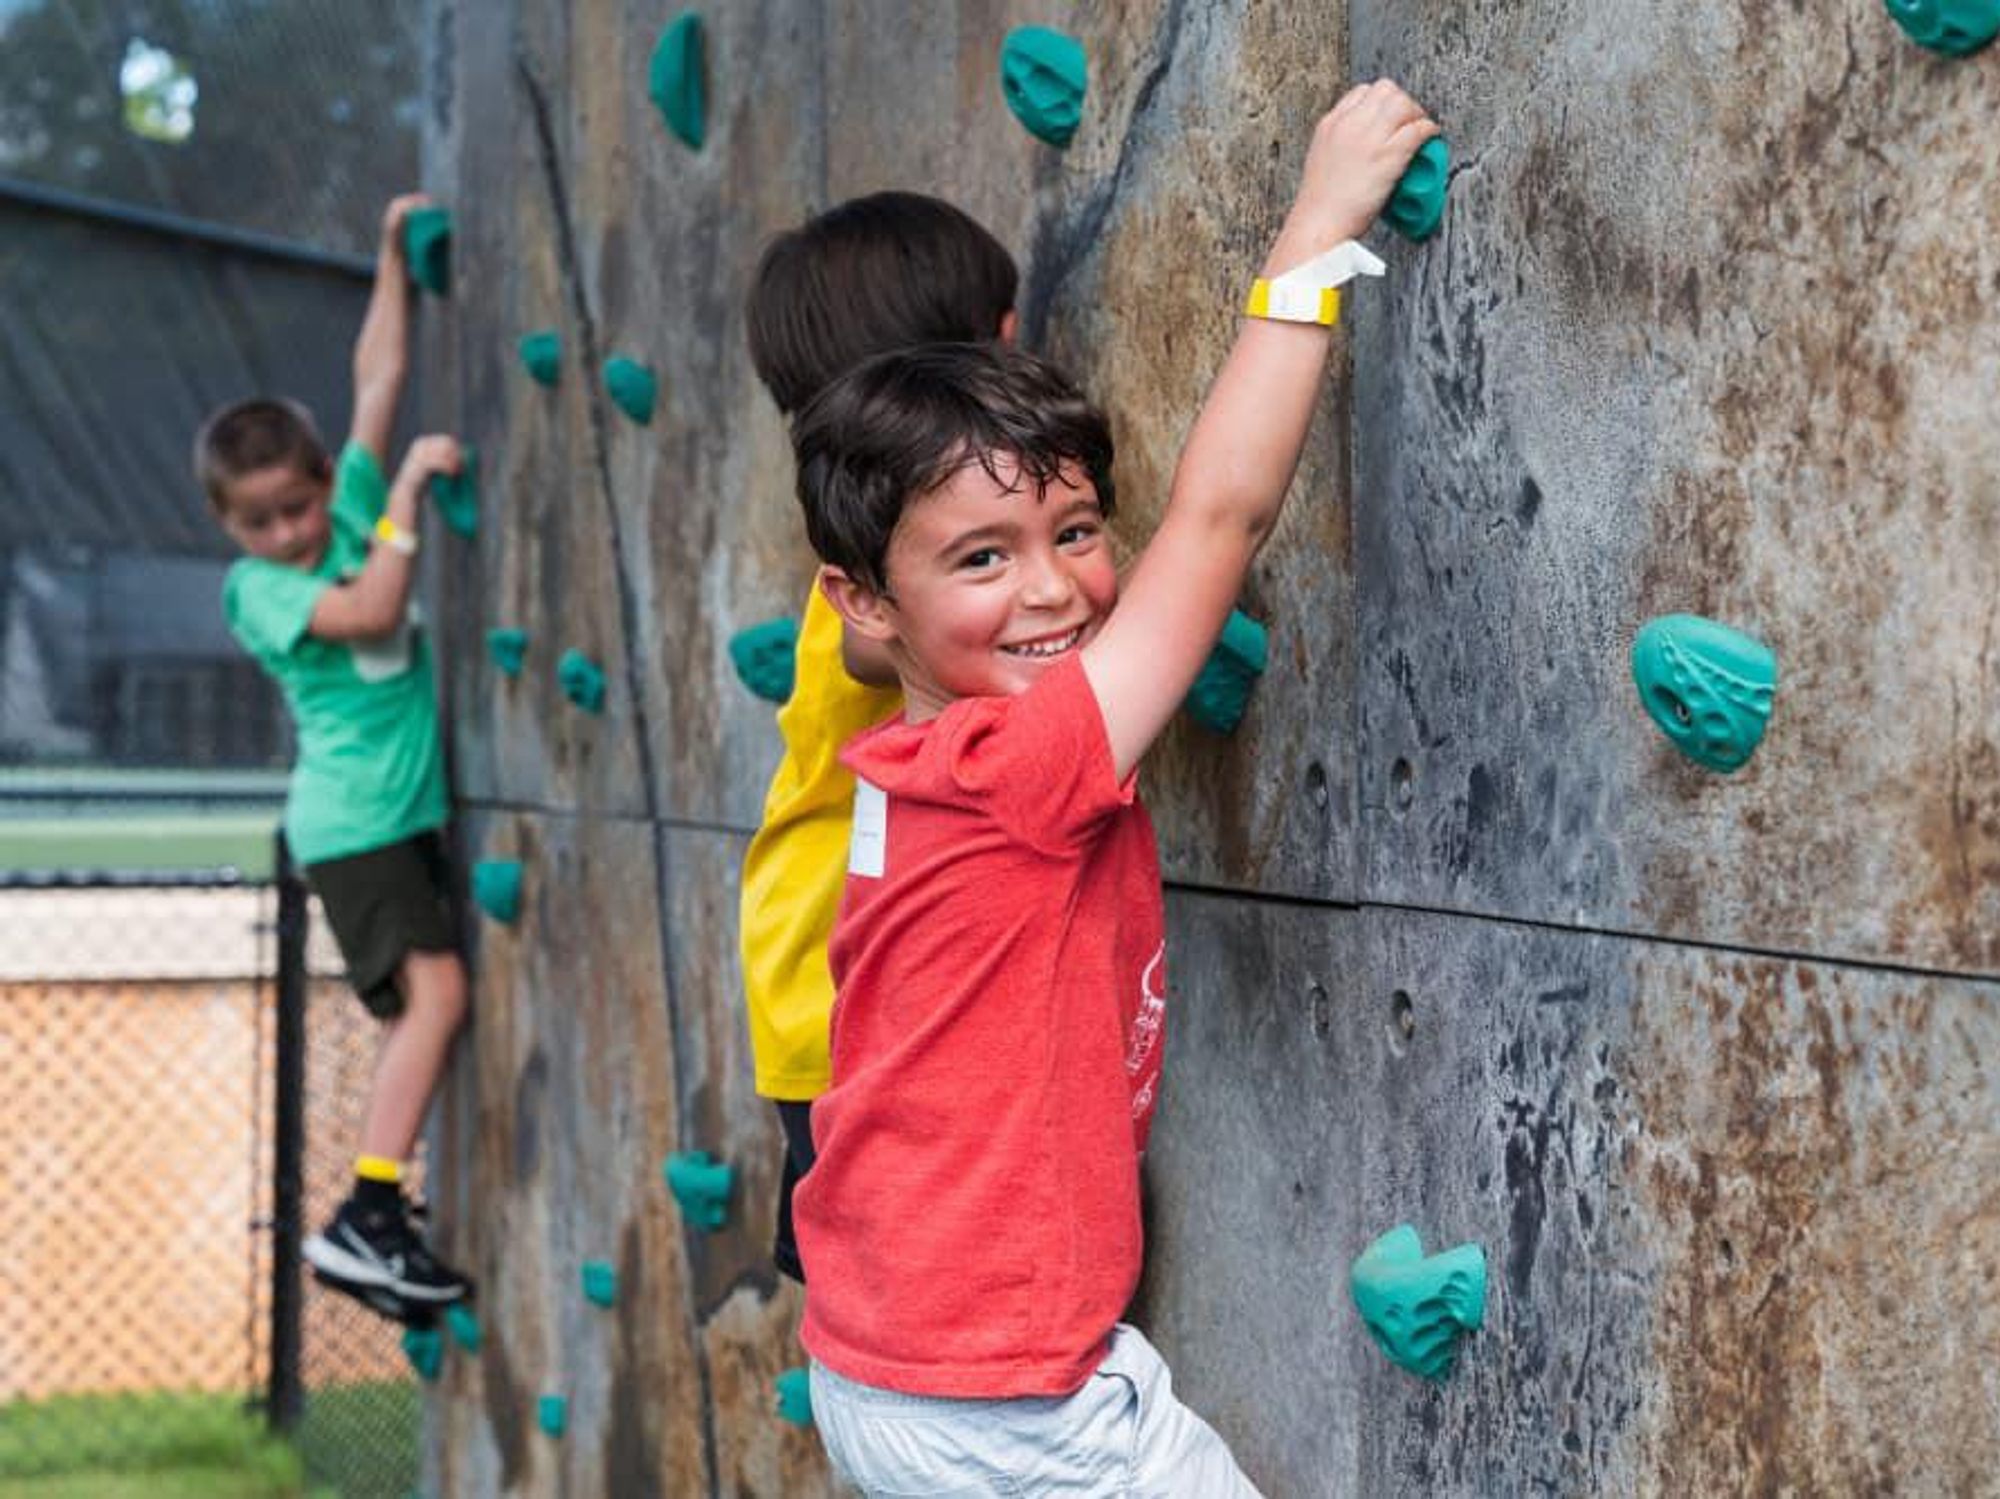 Children can have fun and get fit in a welcoming atmosphere at The Houstonian Club.